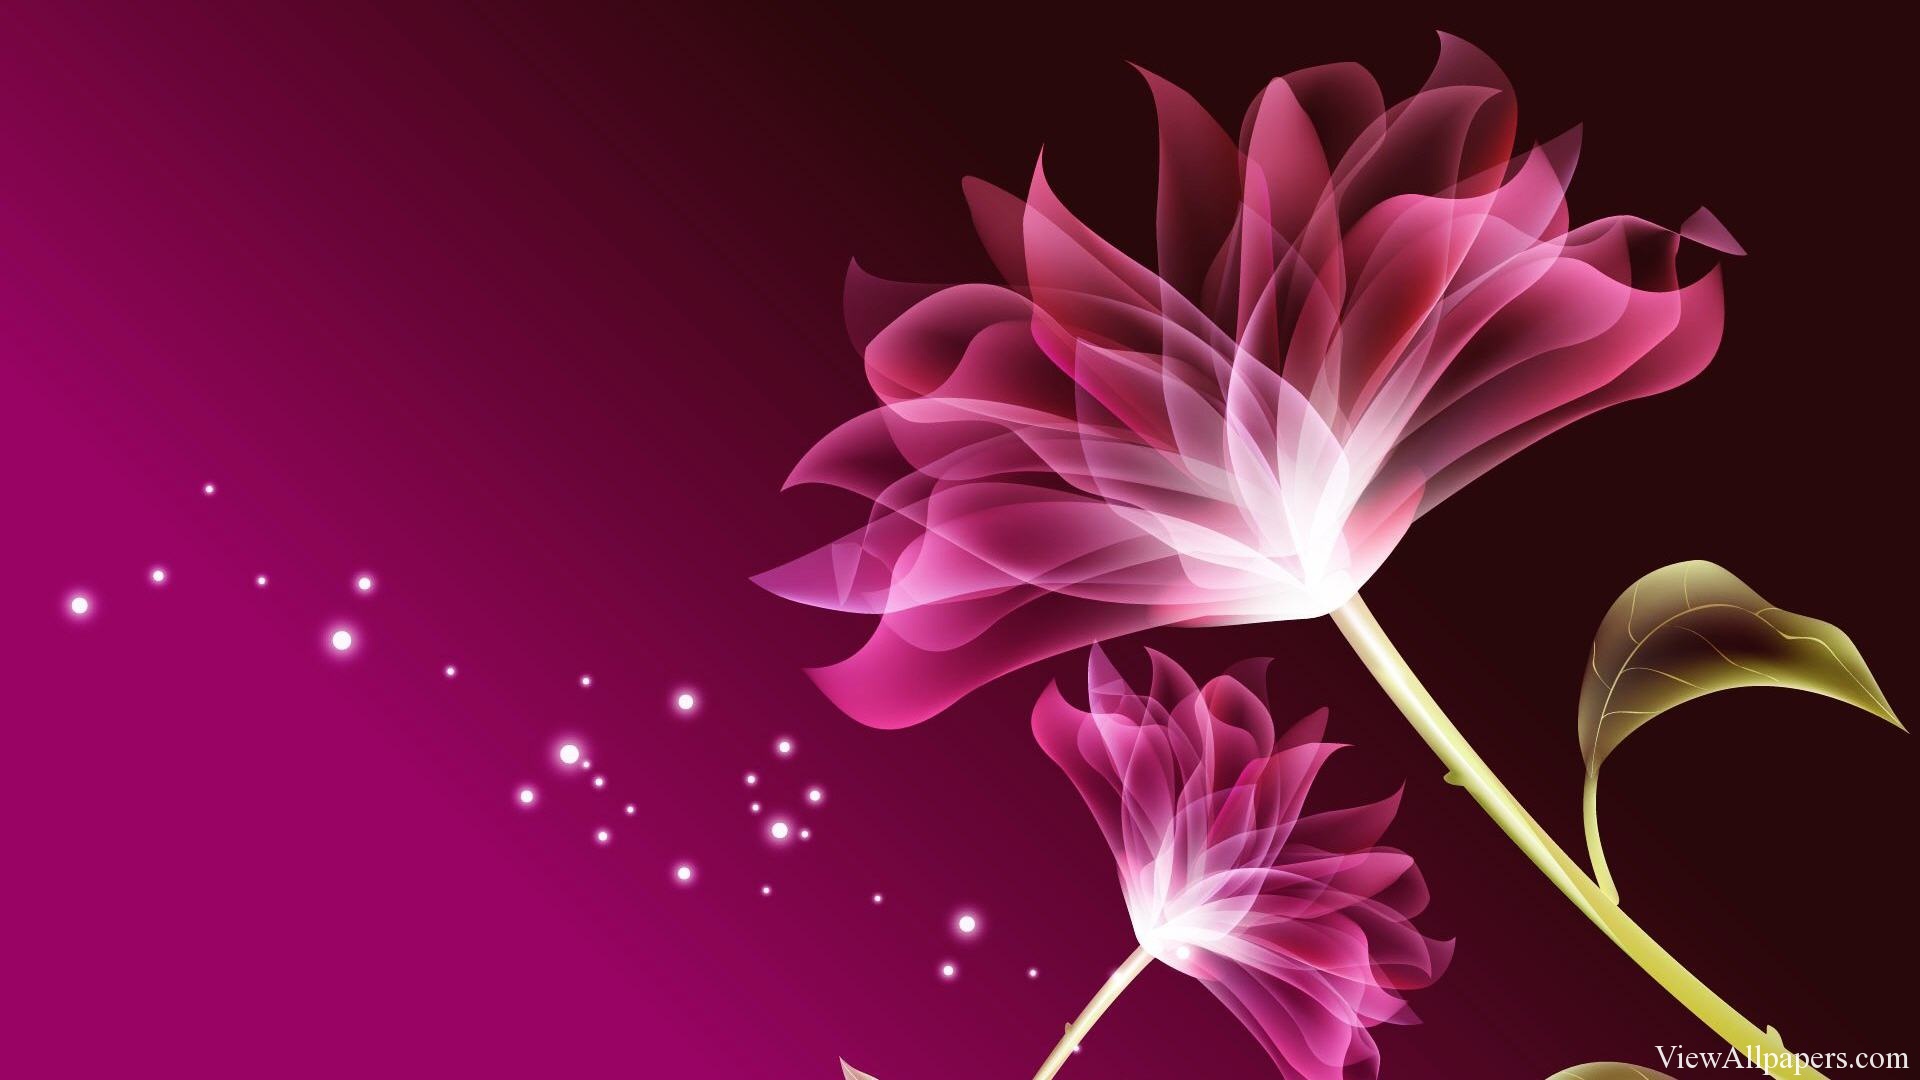 Images wallpapers for desktop 3d flowers page 4